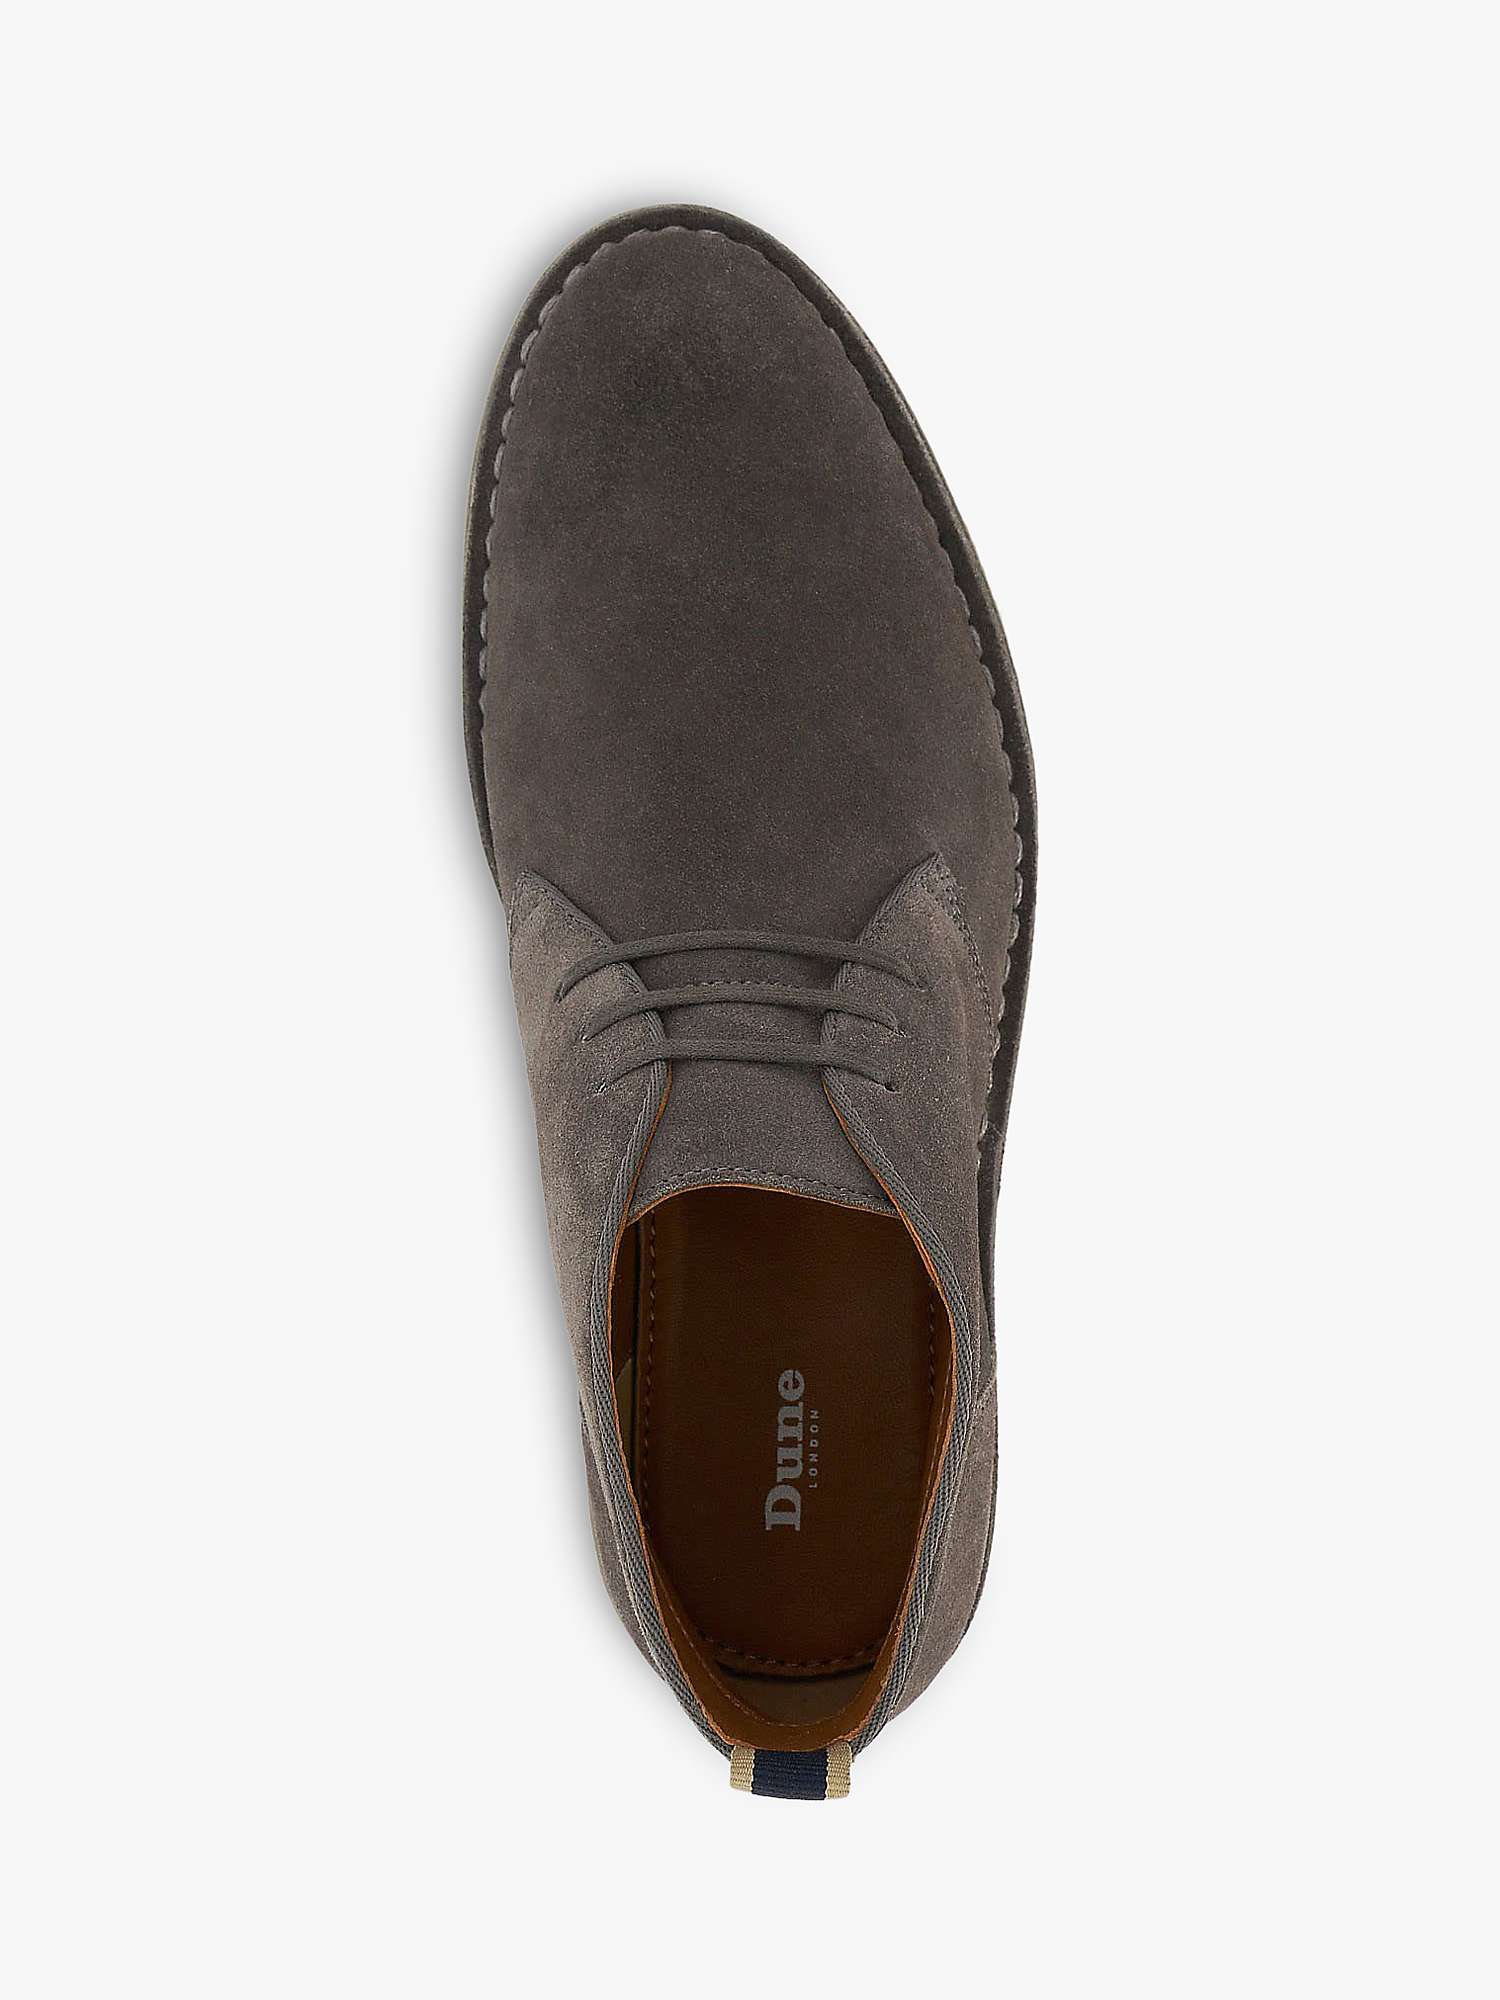 Buy Dune Cashed Suede Casual Chukka Boots Online at johnlewis.com